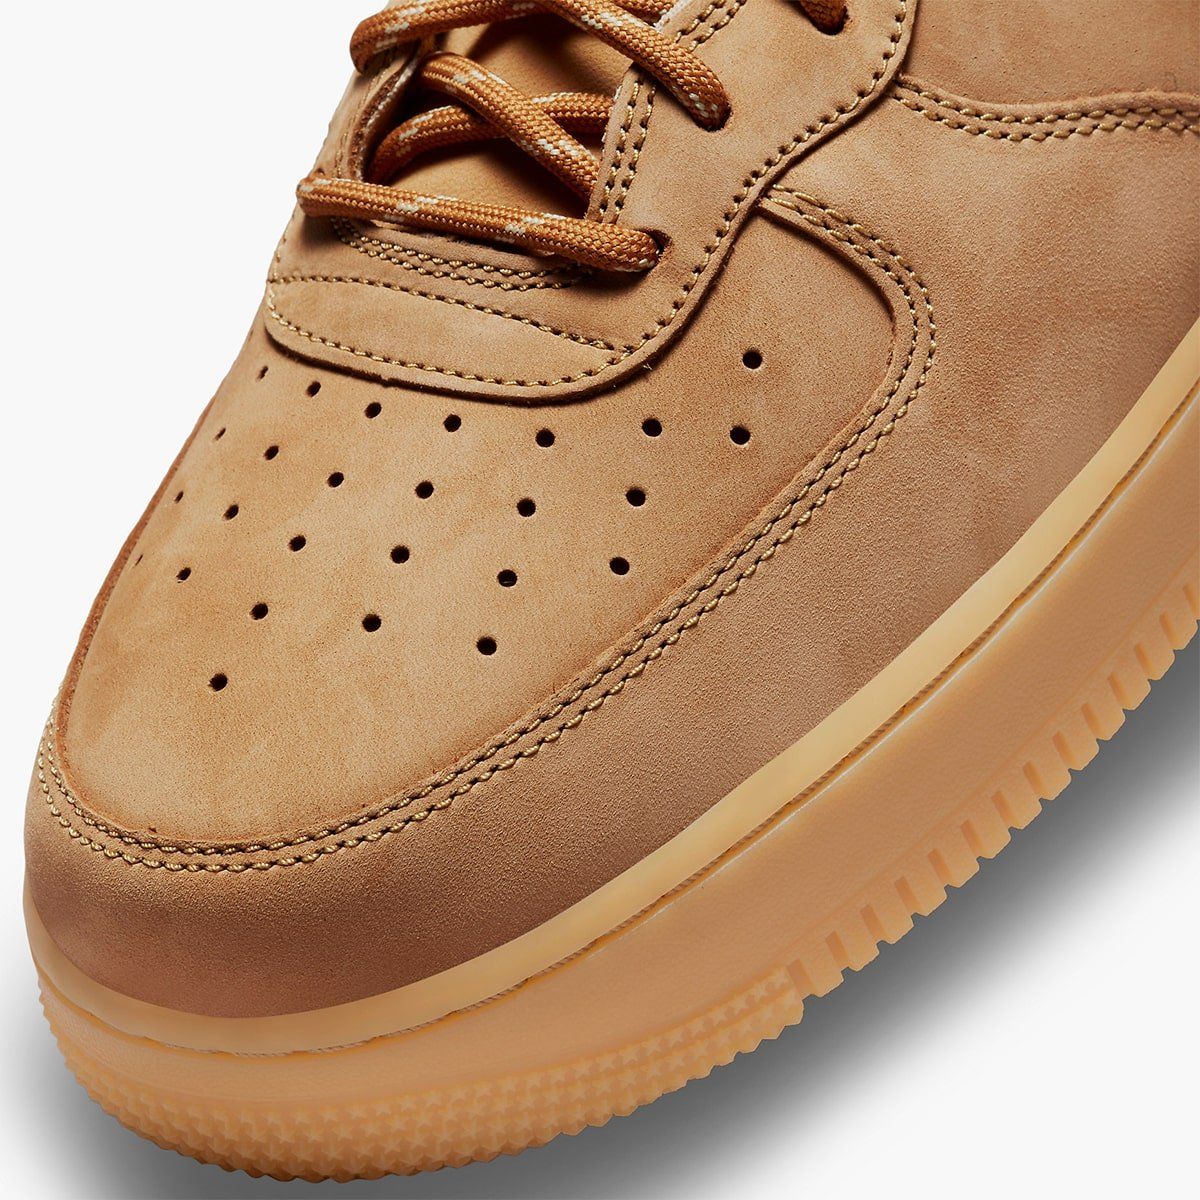 The nike air force 1 flax Air Force 1 Mid “Flax” Returns February 24th | HOUSE OF HEAT